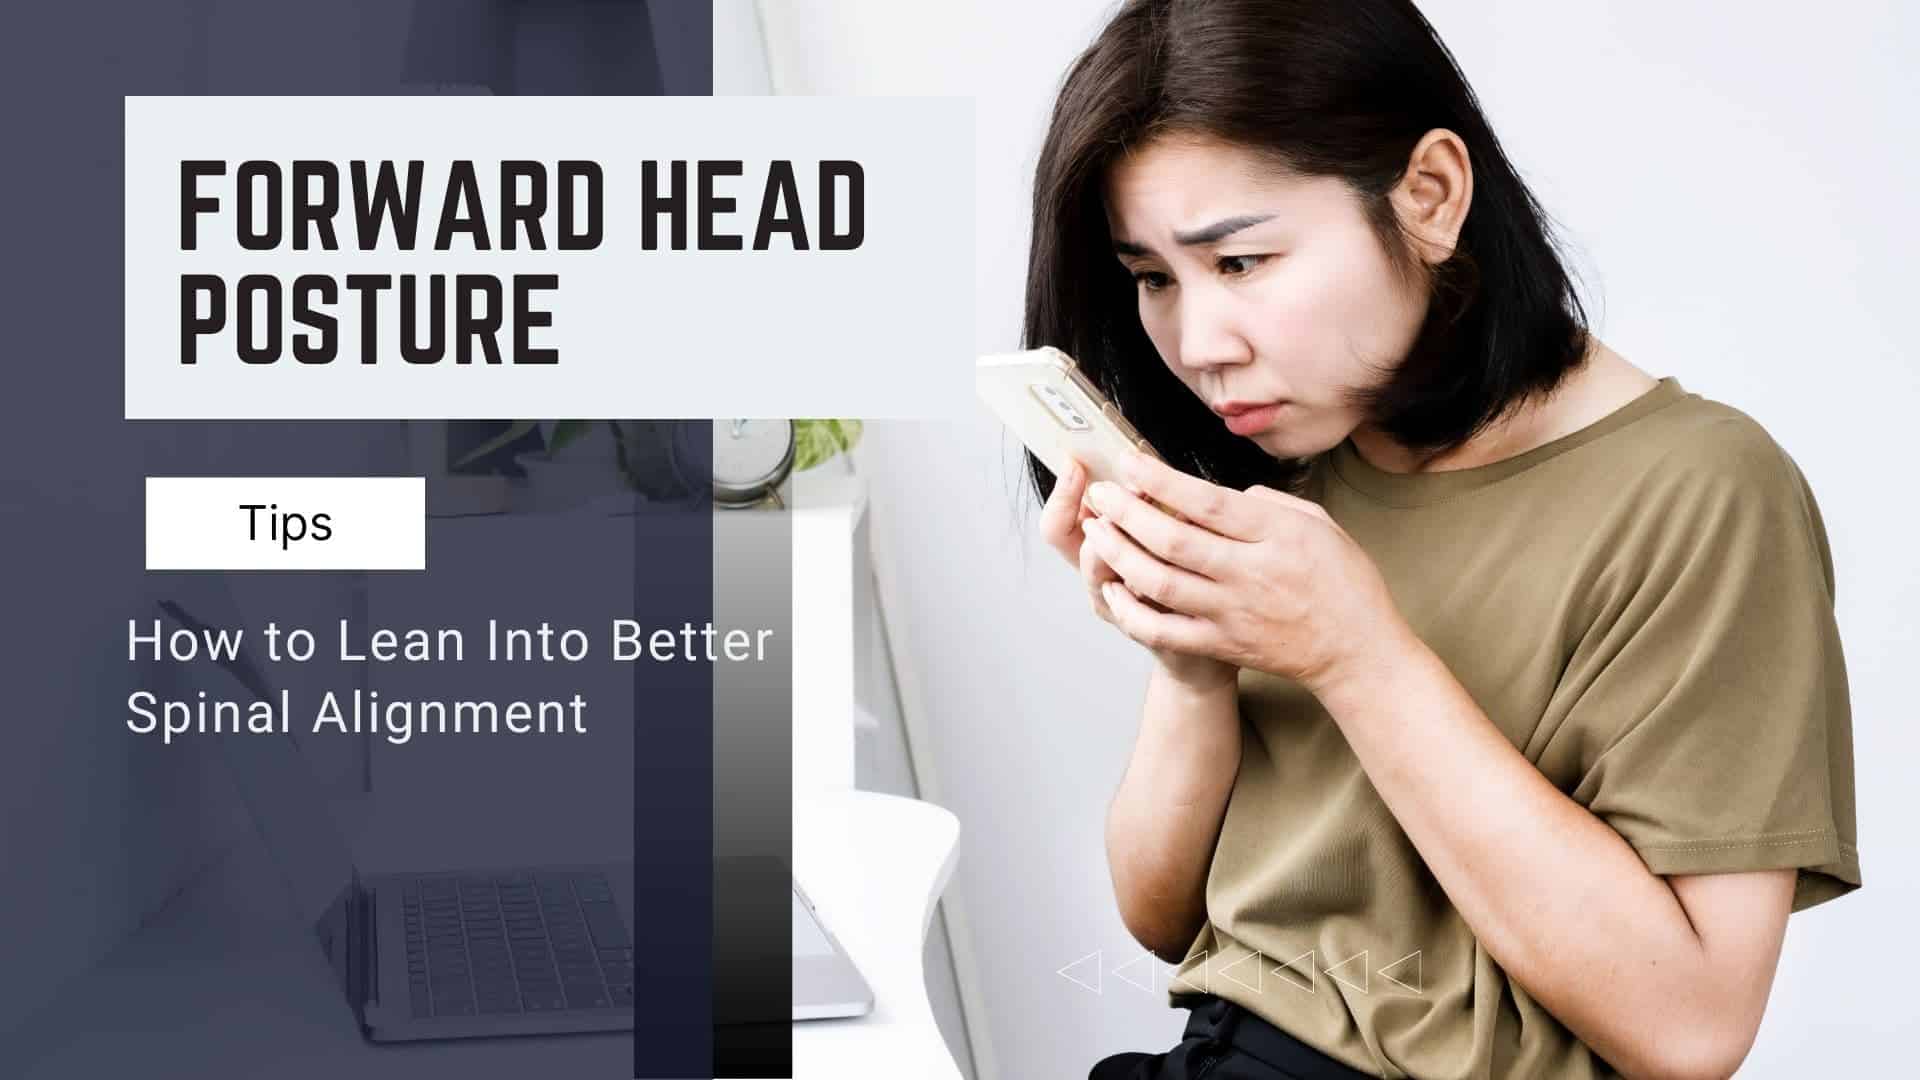 Forward Head Posture_ How to Lean Into Better Spinal Alignment